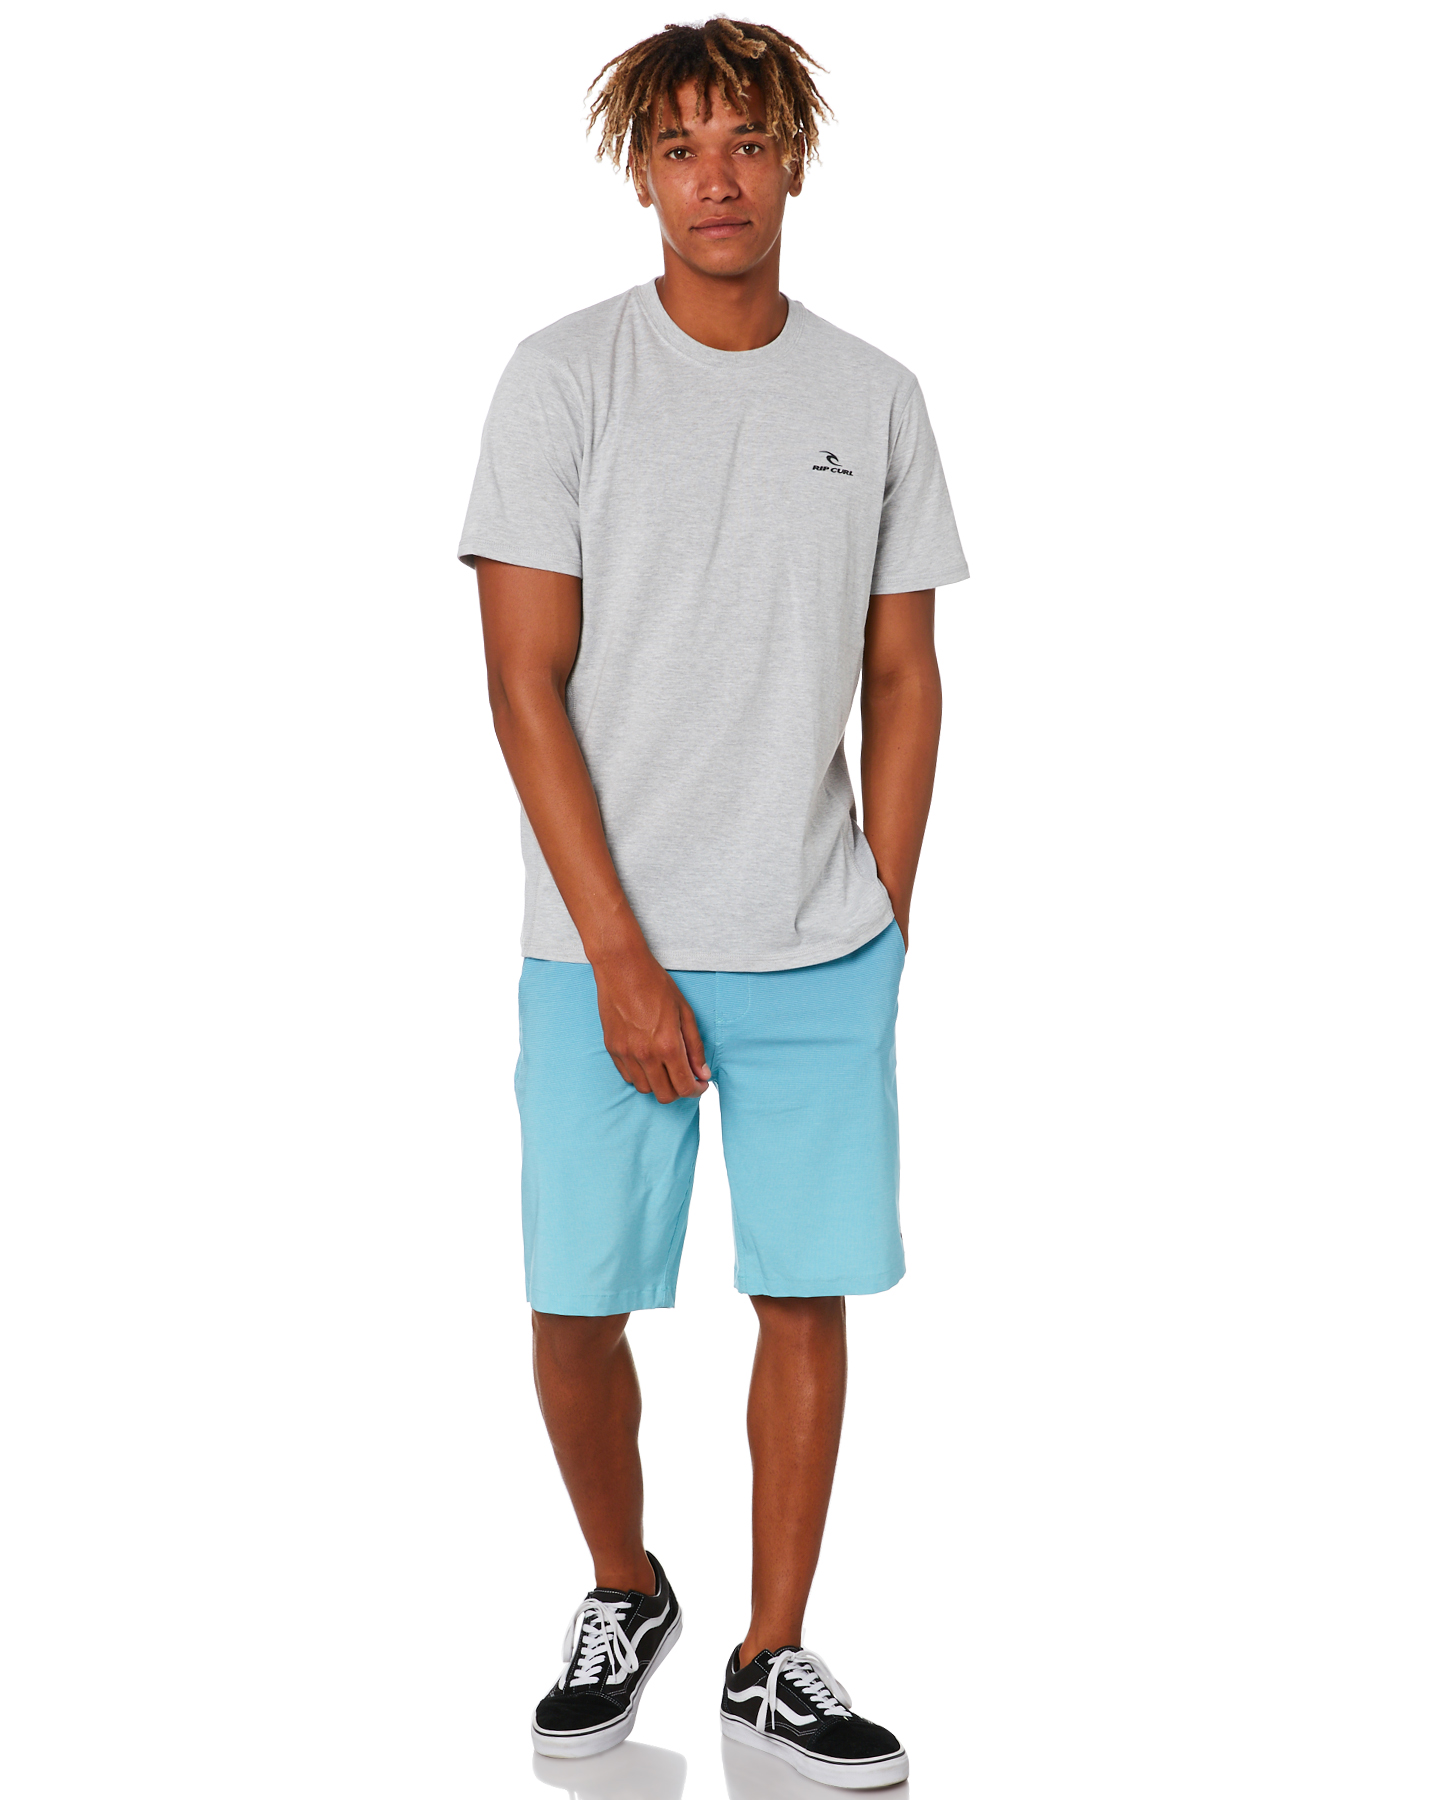 Rip Curl Pivoting Mens Tee - Grey Marle | SurfStitch